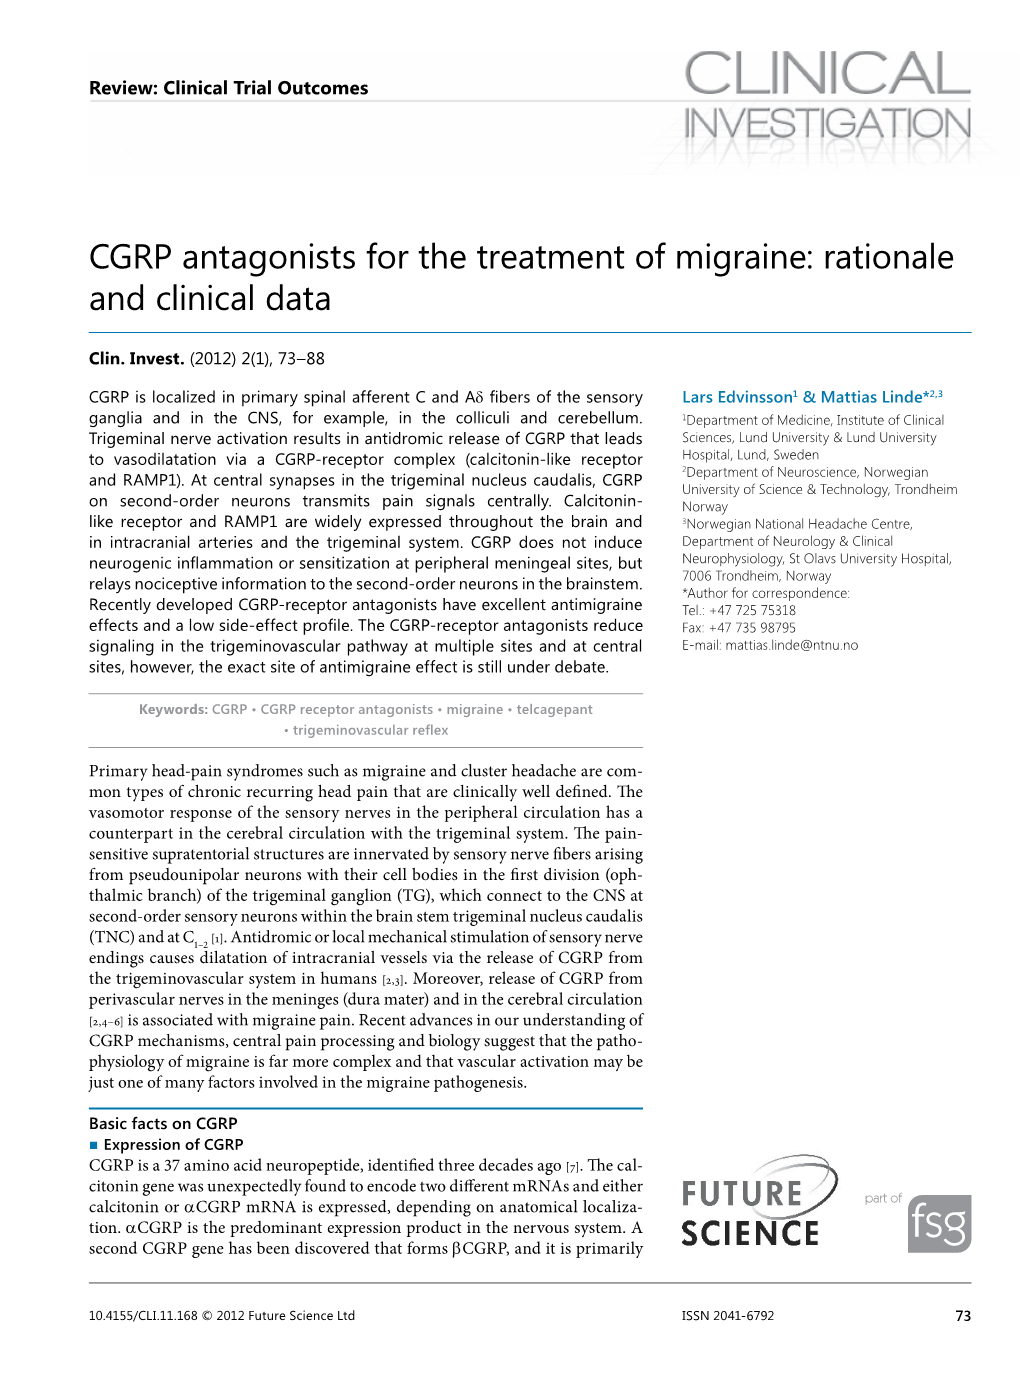 CGRP Antagonists for the Treatment of Migraine: Rationale and Clinical Data